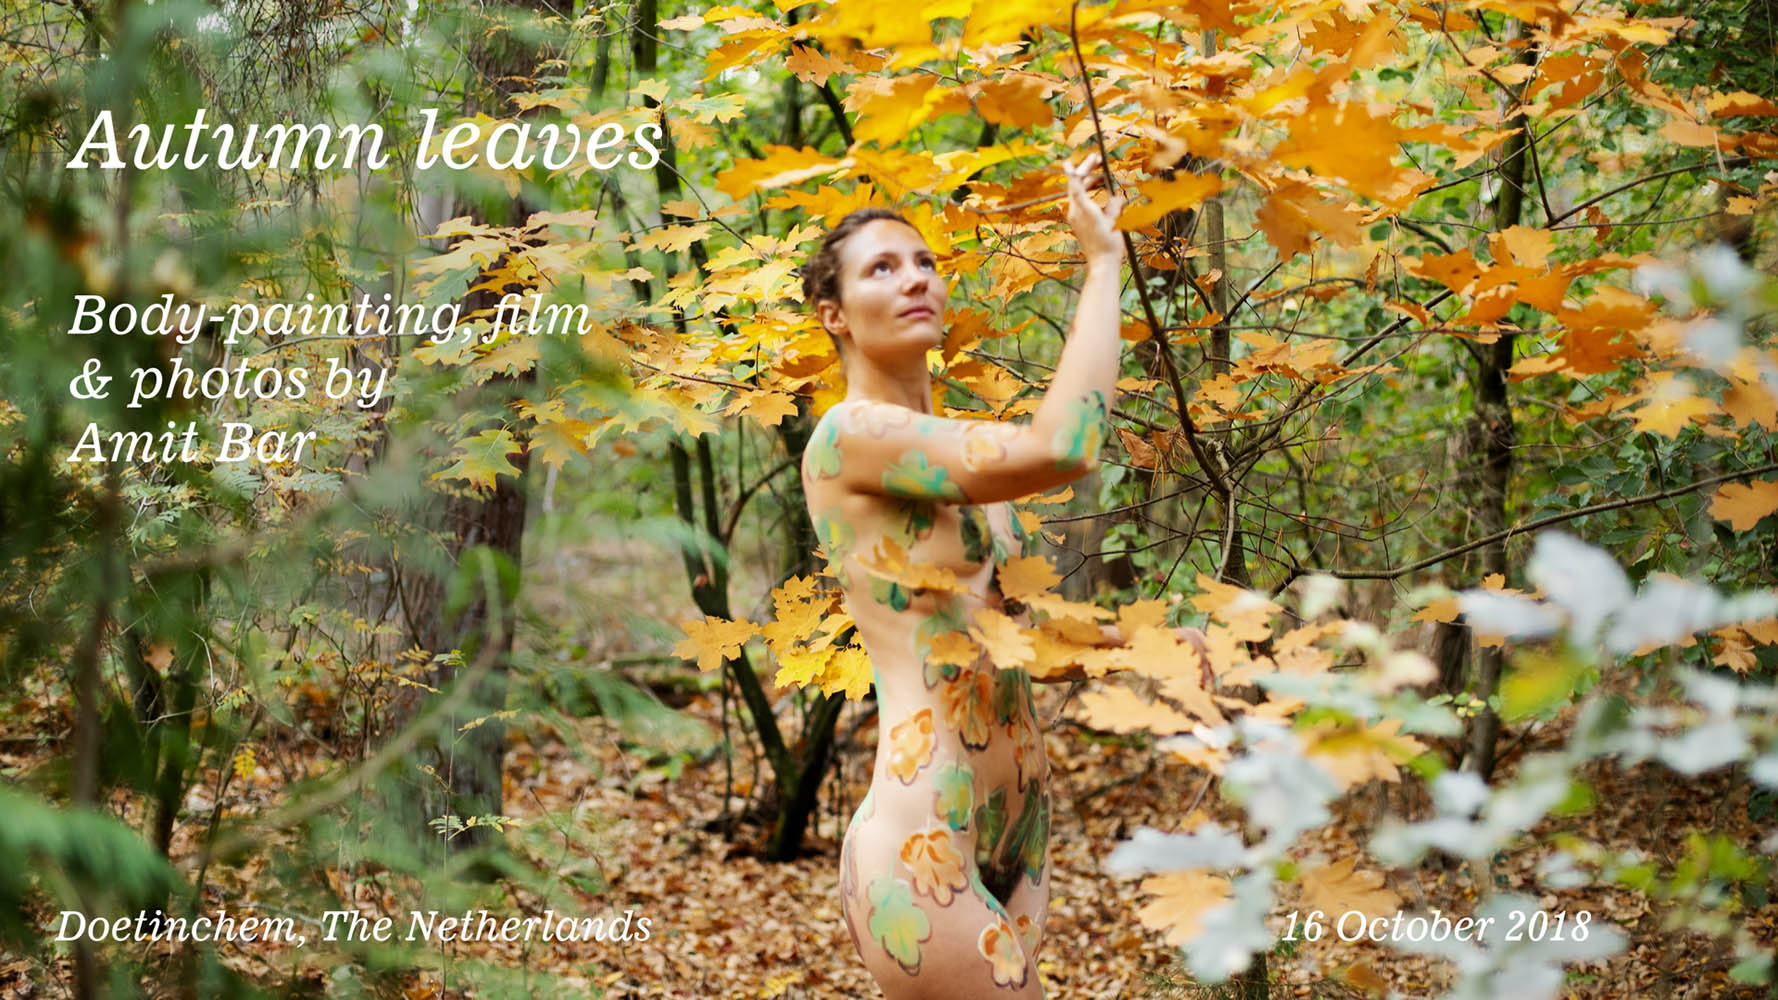 Body painted autumn leaves video title